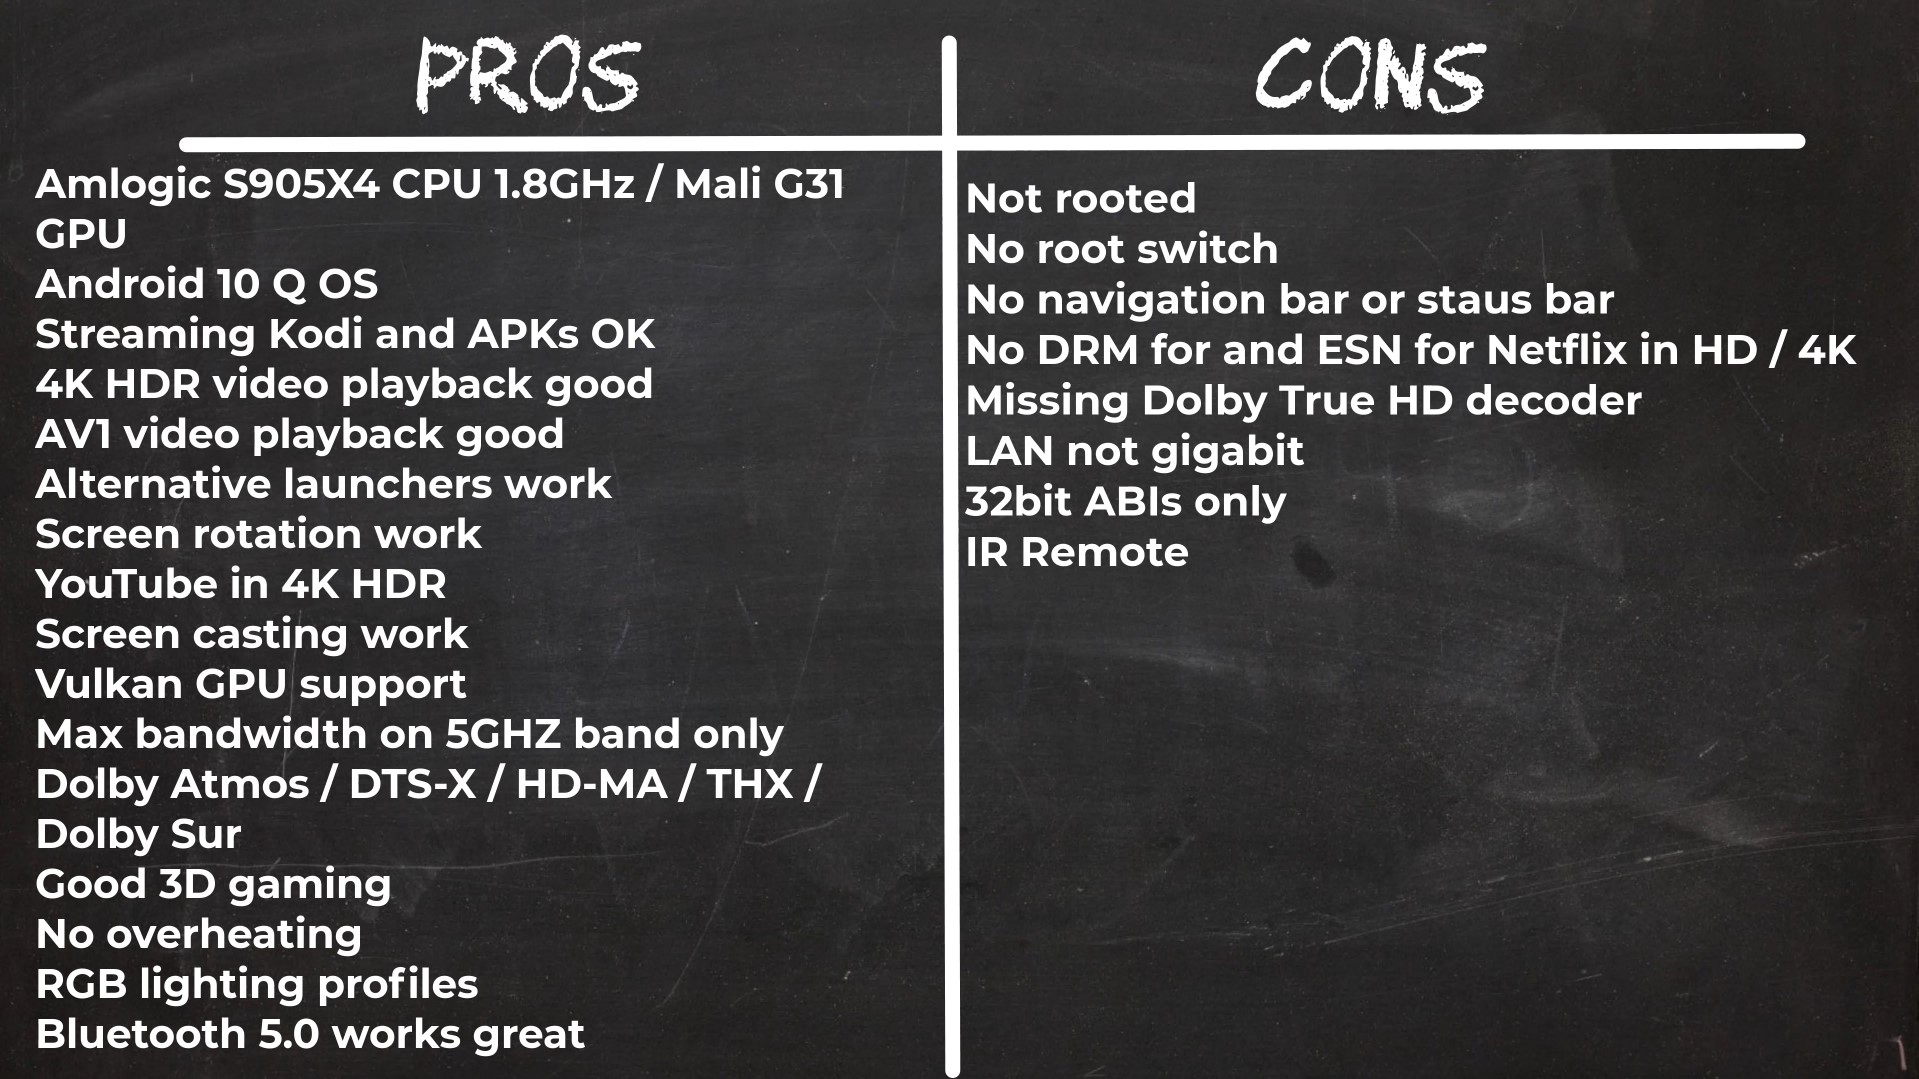 X4 Pro TV Box pros and cons